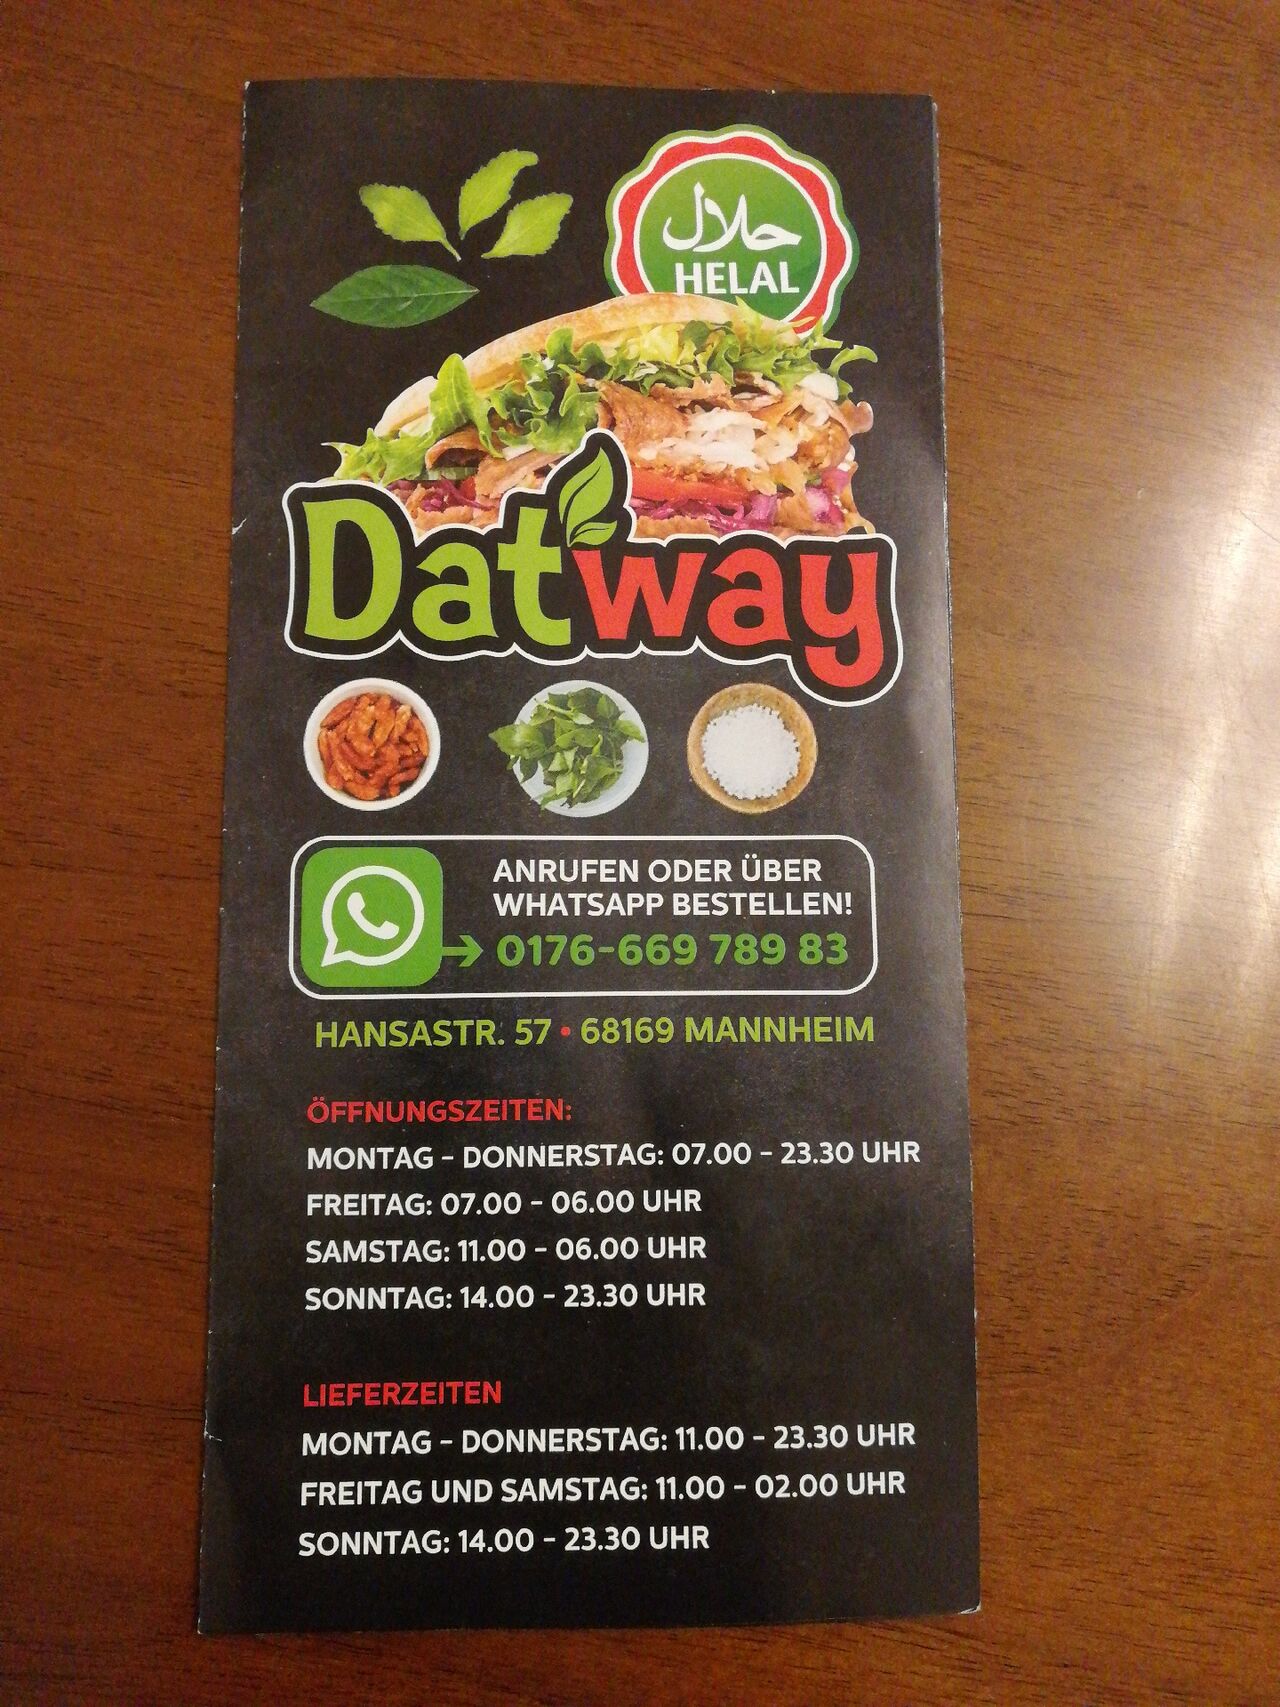 A photo of Datway